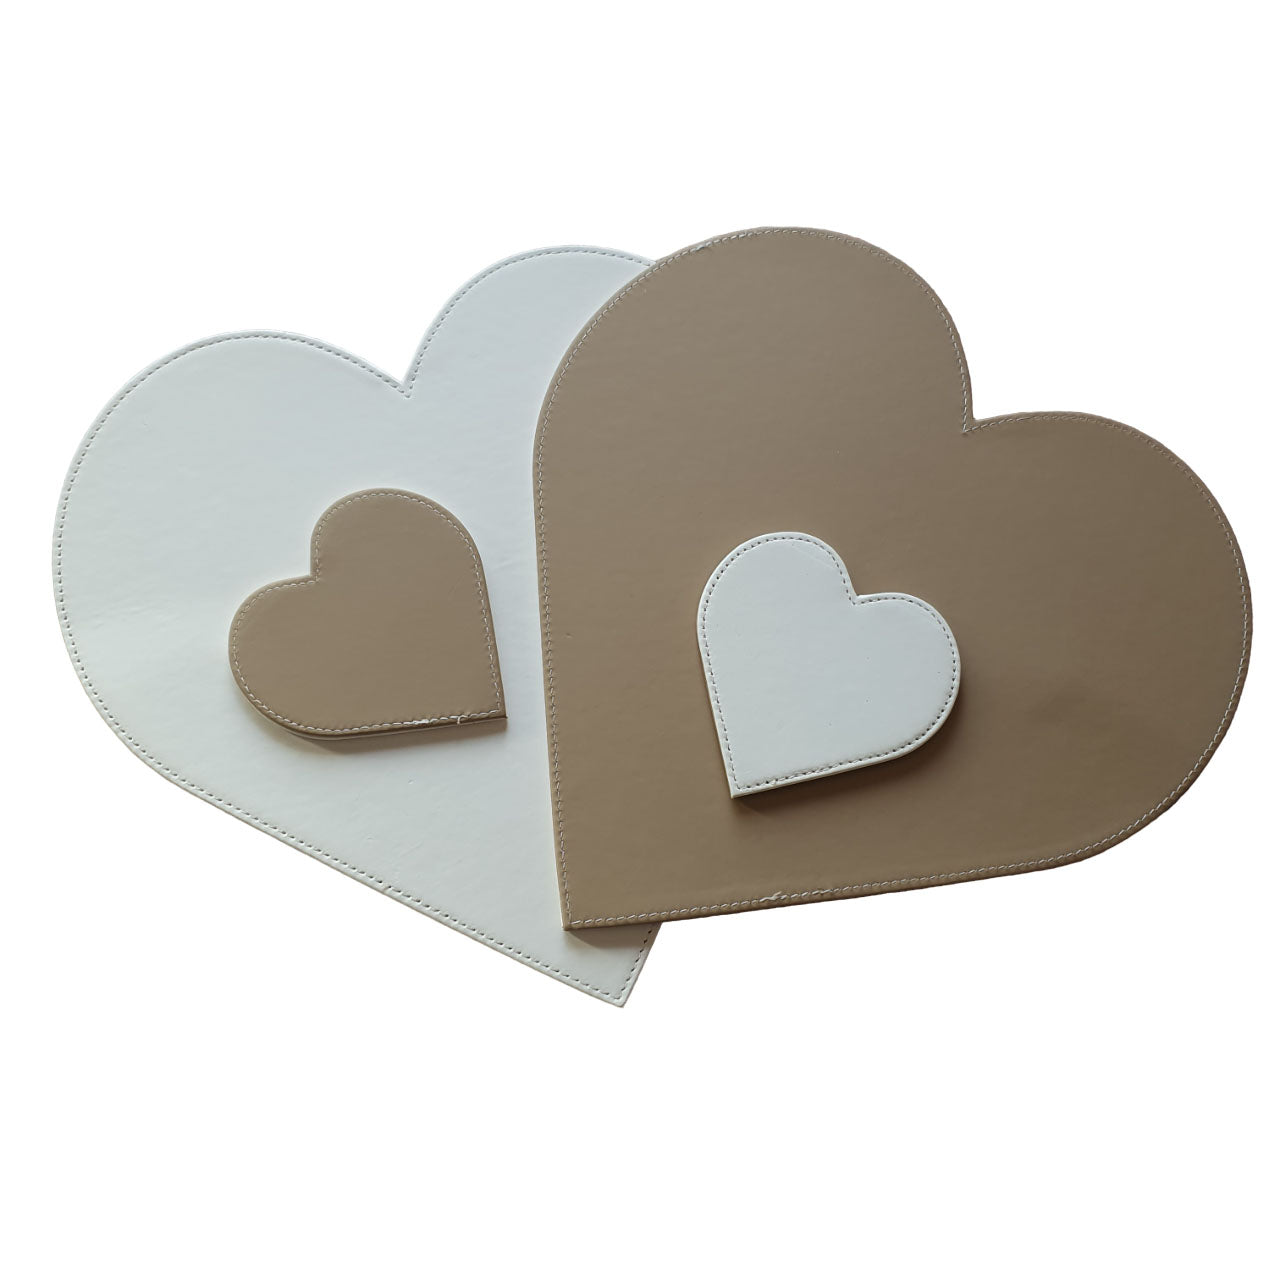 heart shaped placemat blanks with matching coasters, showing front and reverse sides